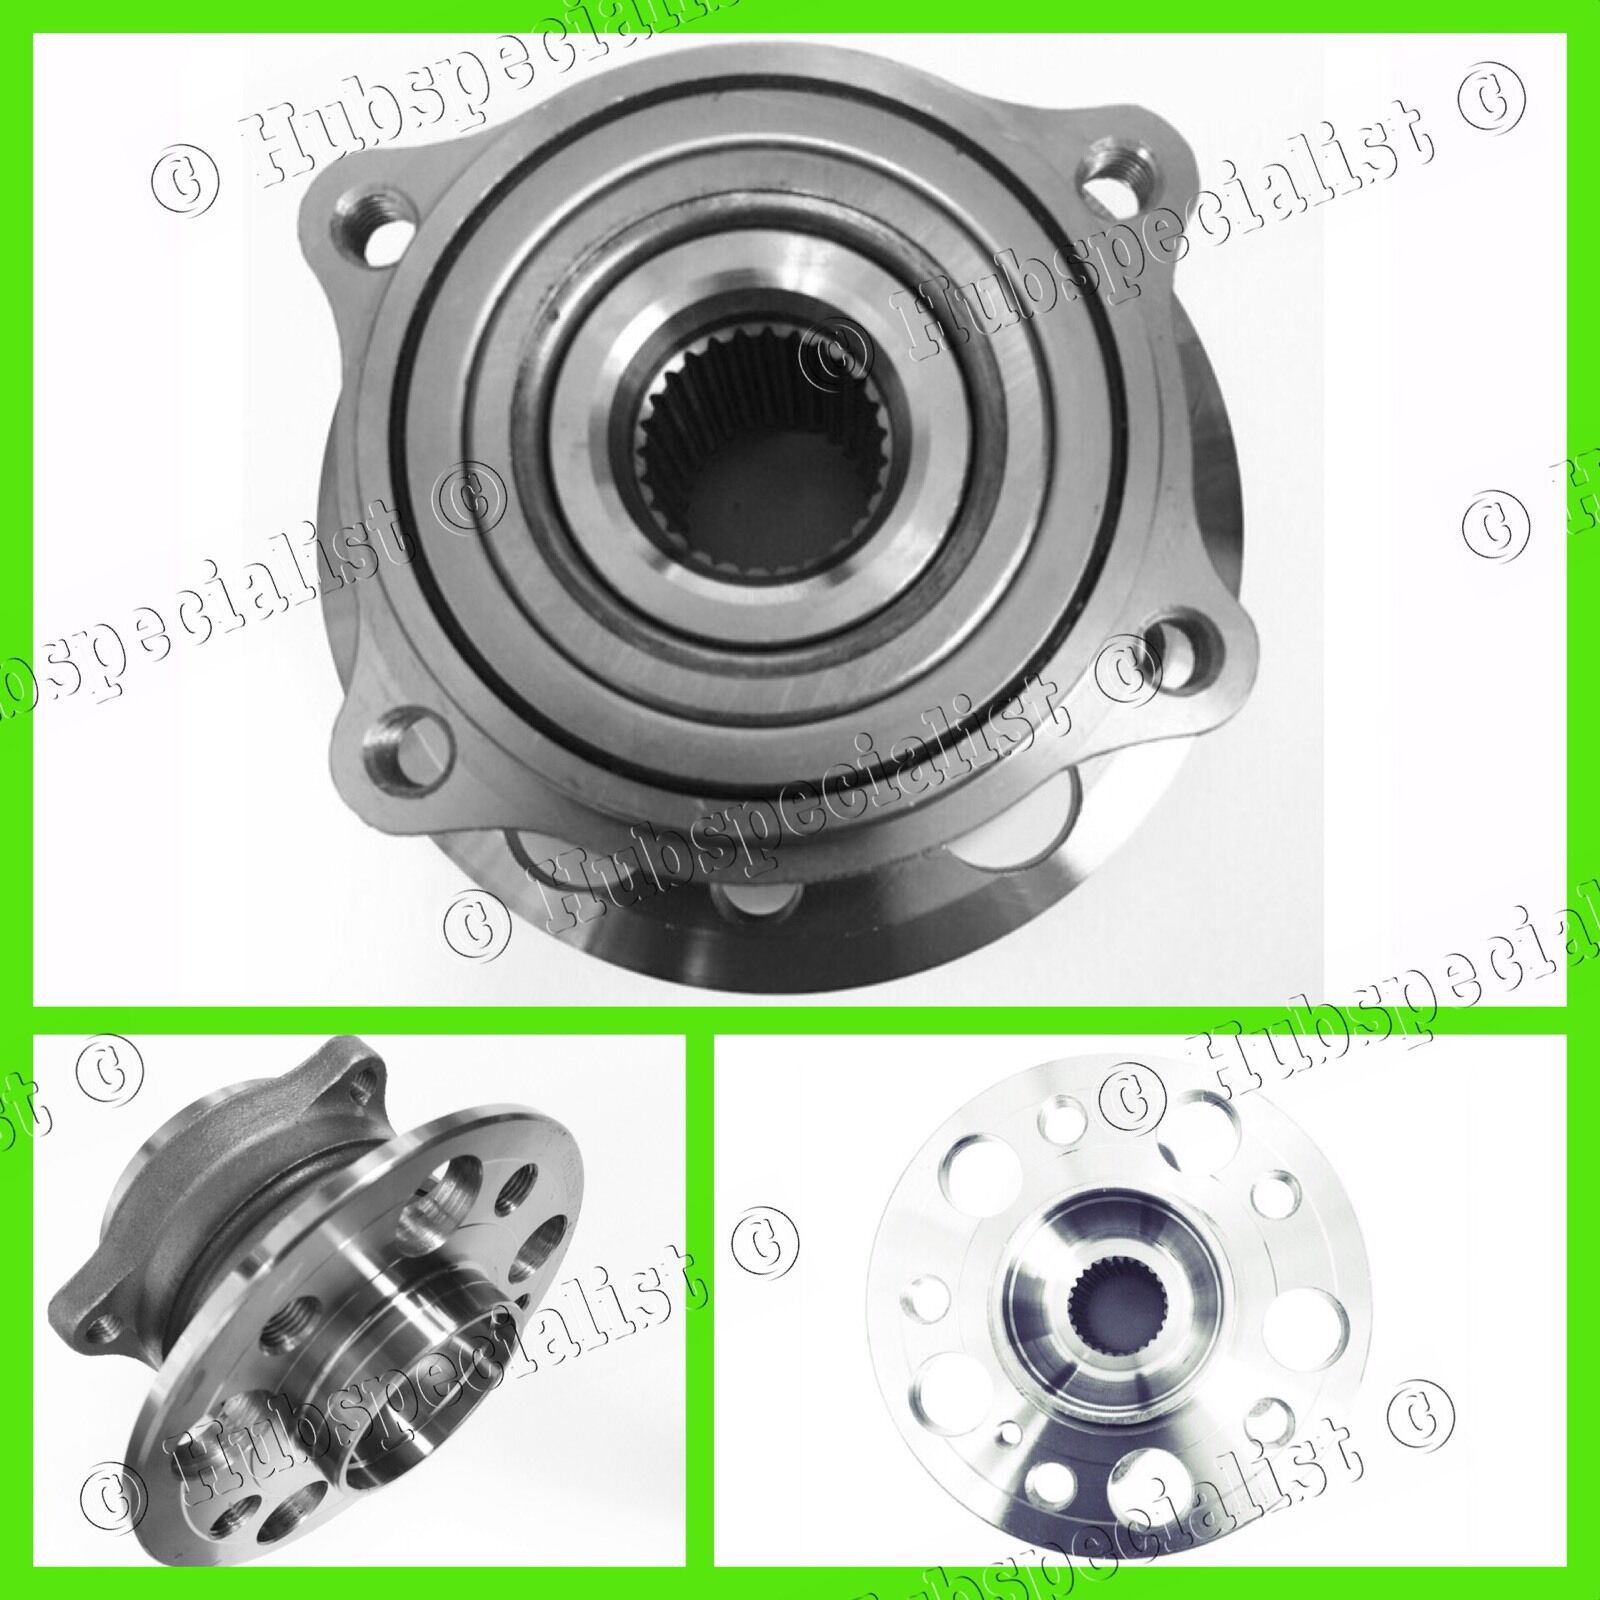 REAR HUB BEARING ASSEMBLY FOR MERCEDES S550 600 63AMG 2007-2013  NEW FAST SHIP